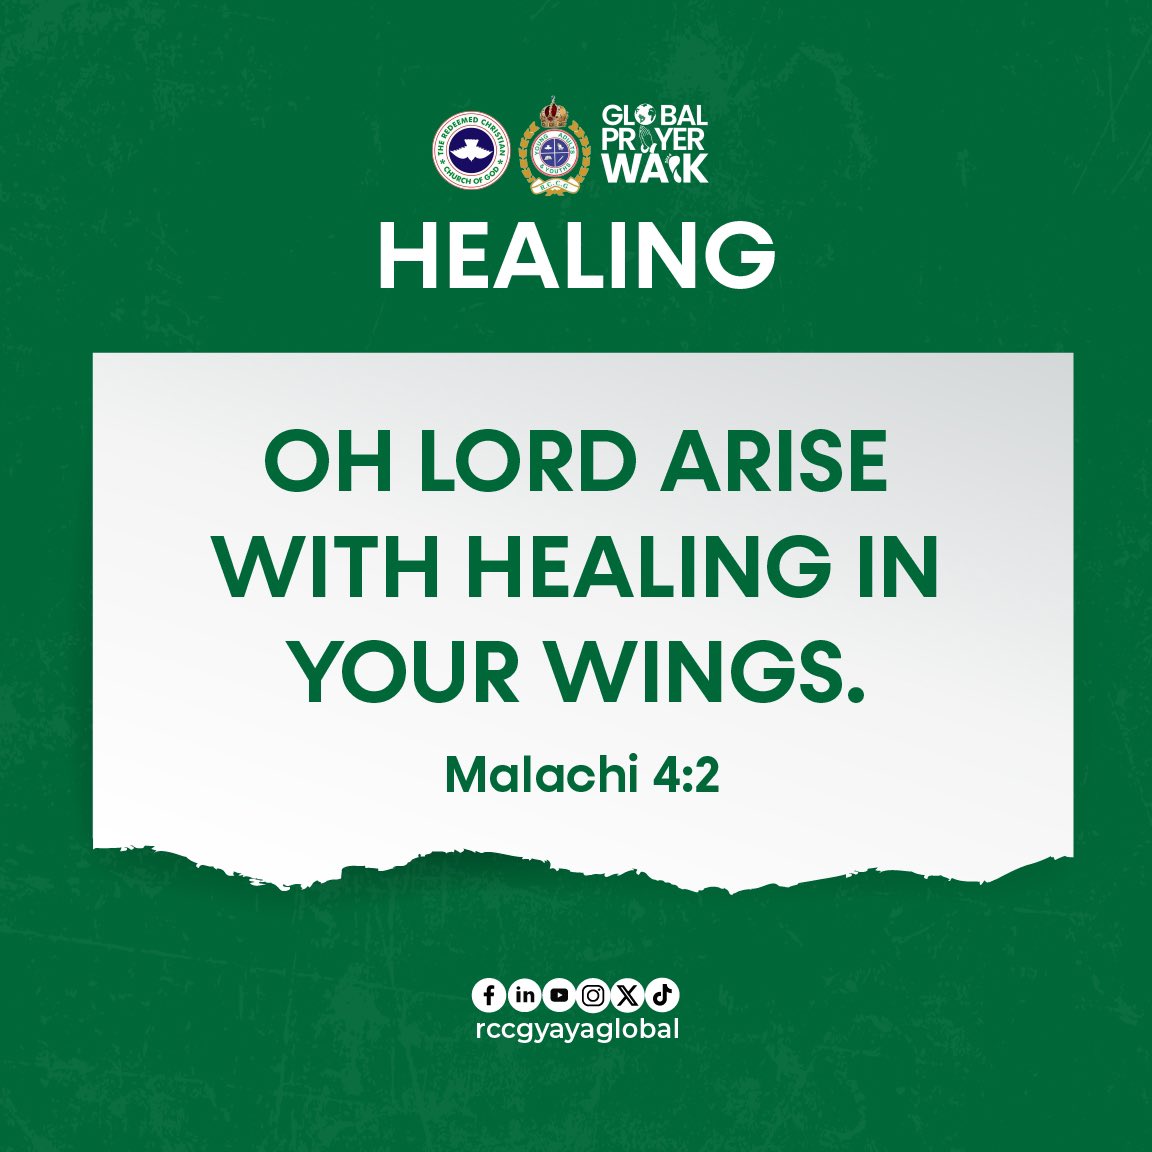 Oh Lord, arise with healing in Your wings and set us free from the shackles of ungodly and unrighteous practices in all our nations in Jesus' name!

#RCCGYouthGPW #HEALING #RCCGYouthGPW2024 #GPW2024